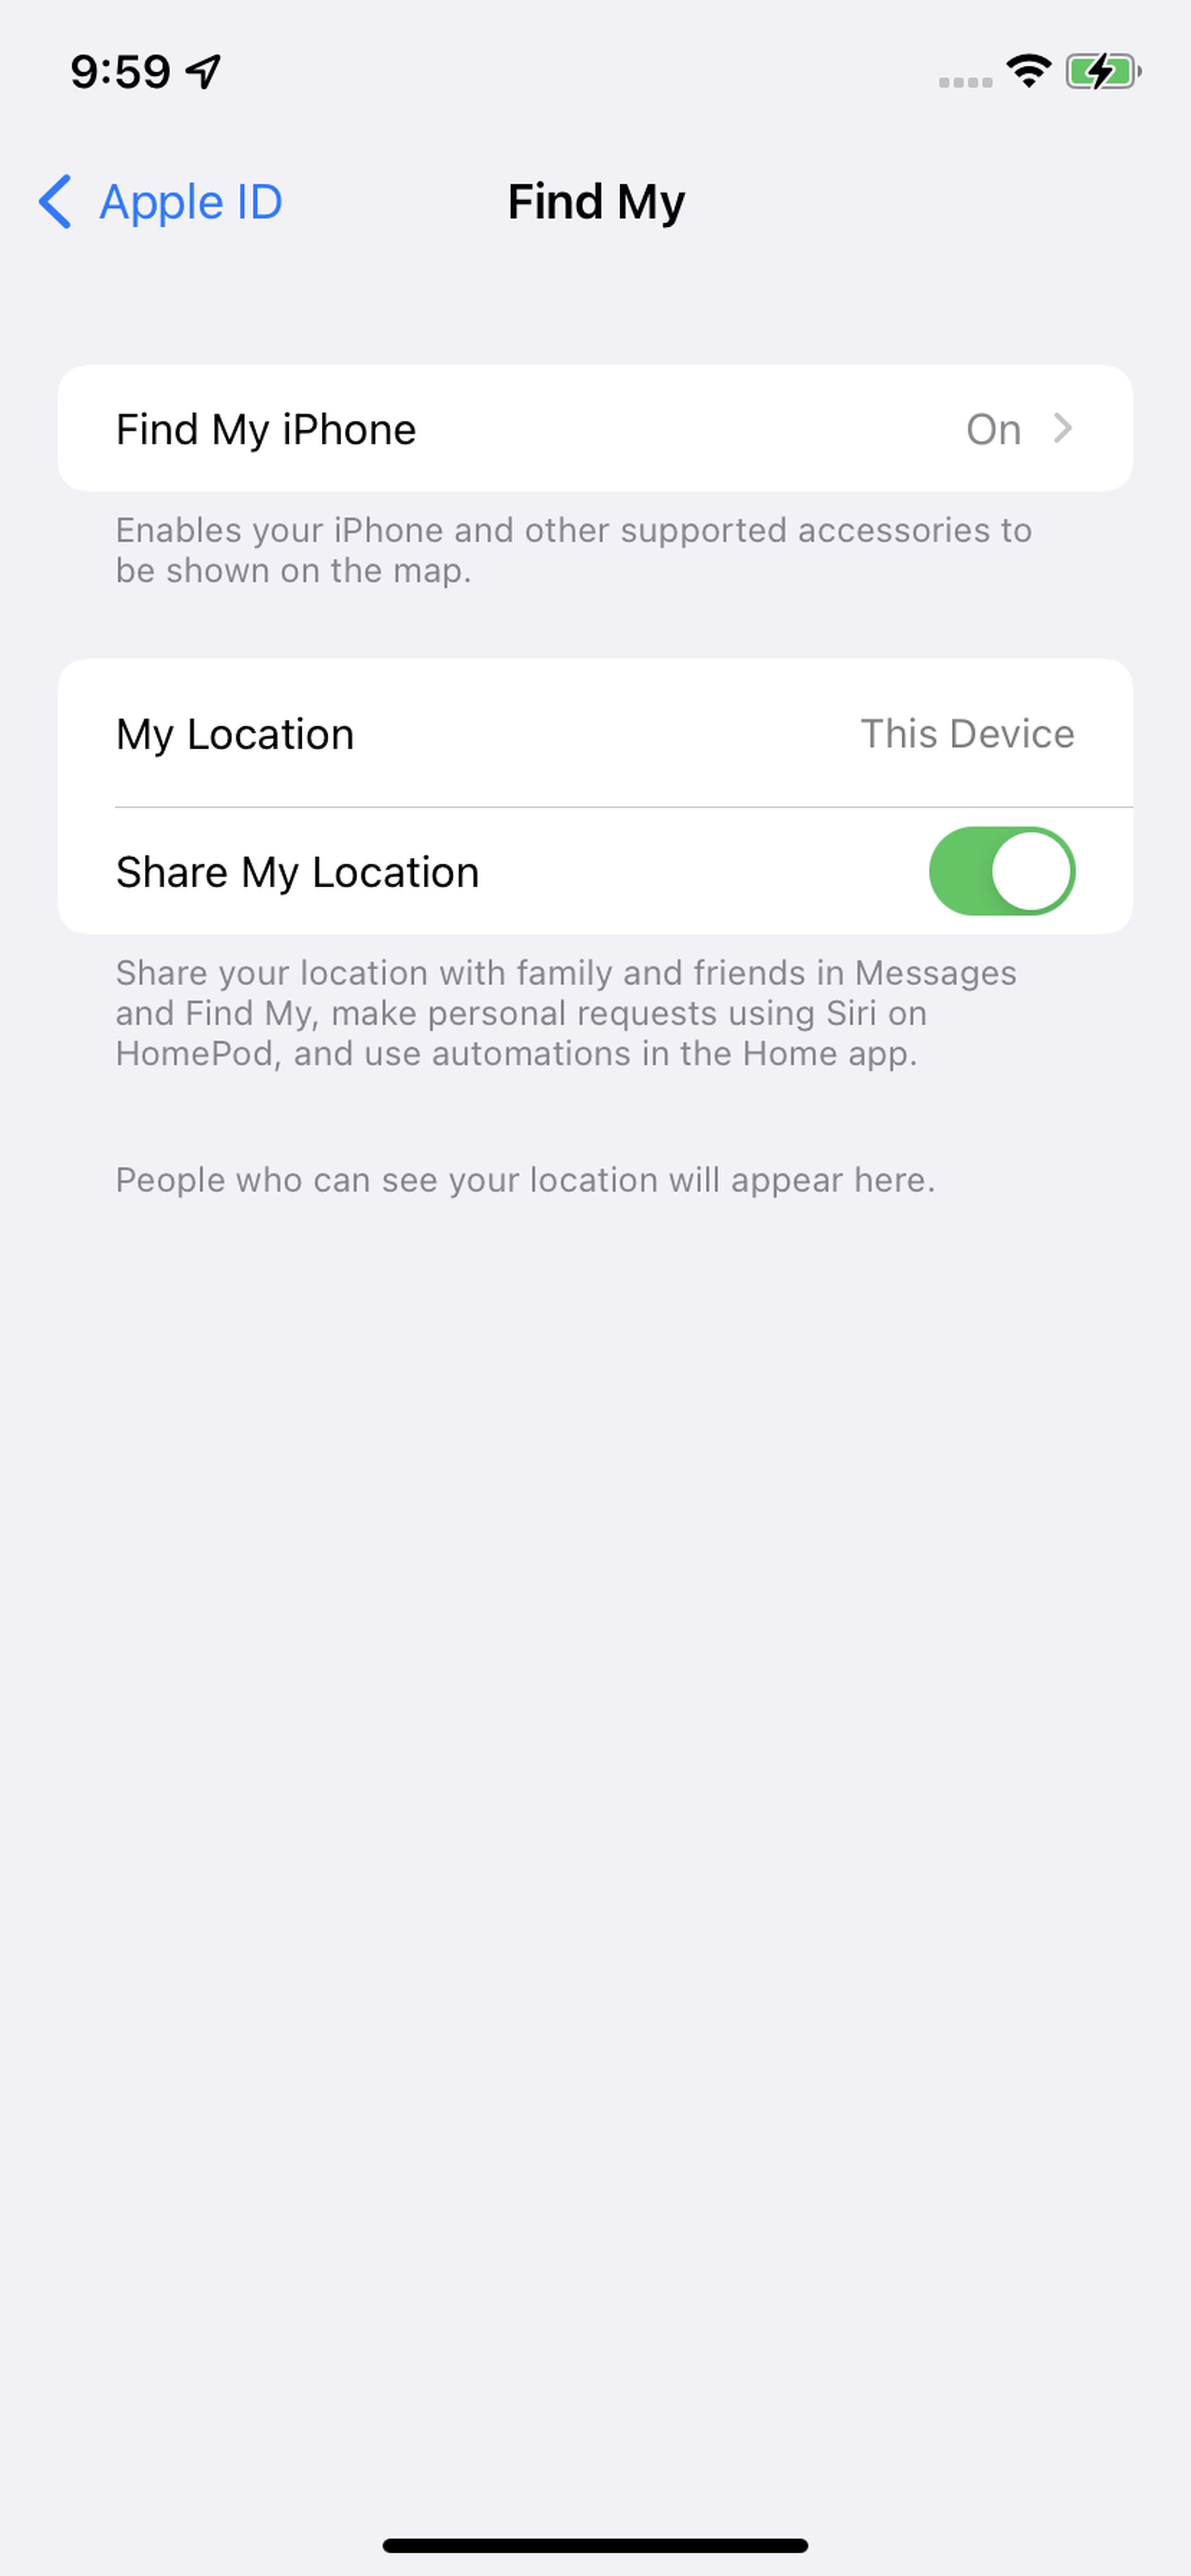 The Find My app lets you share your location.